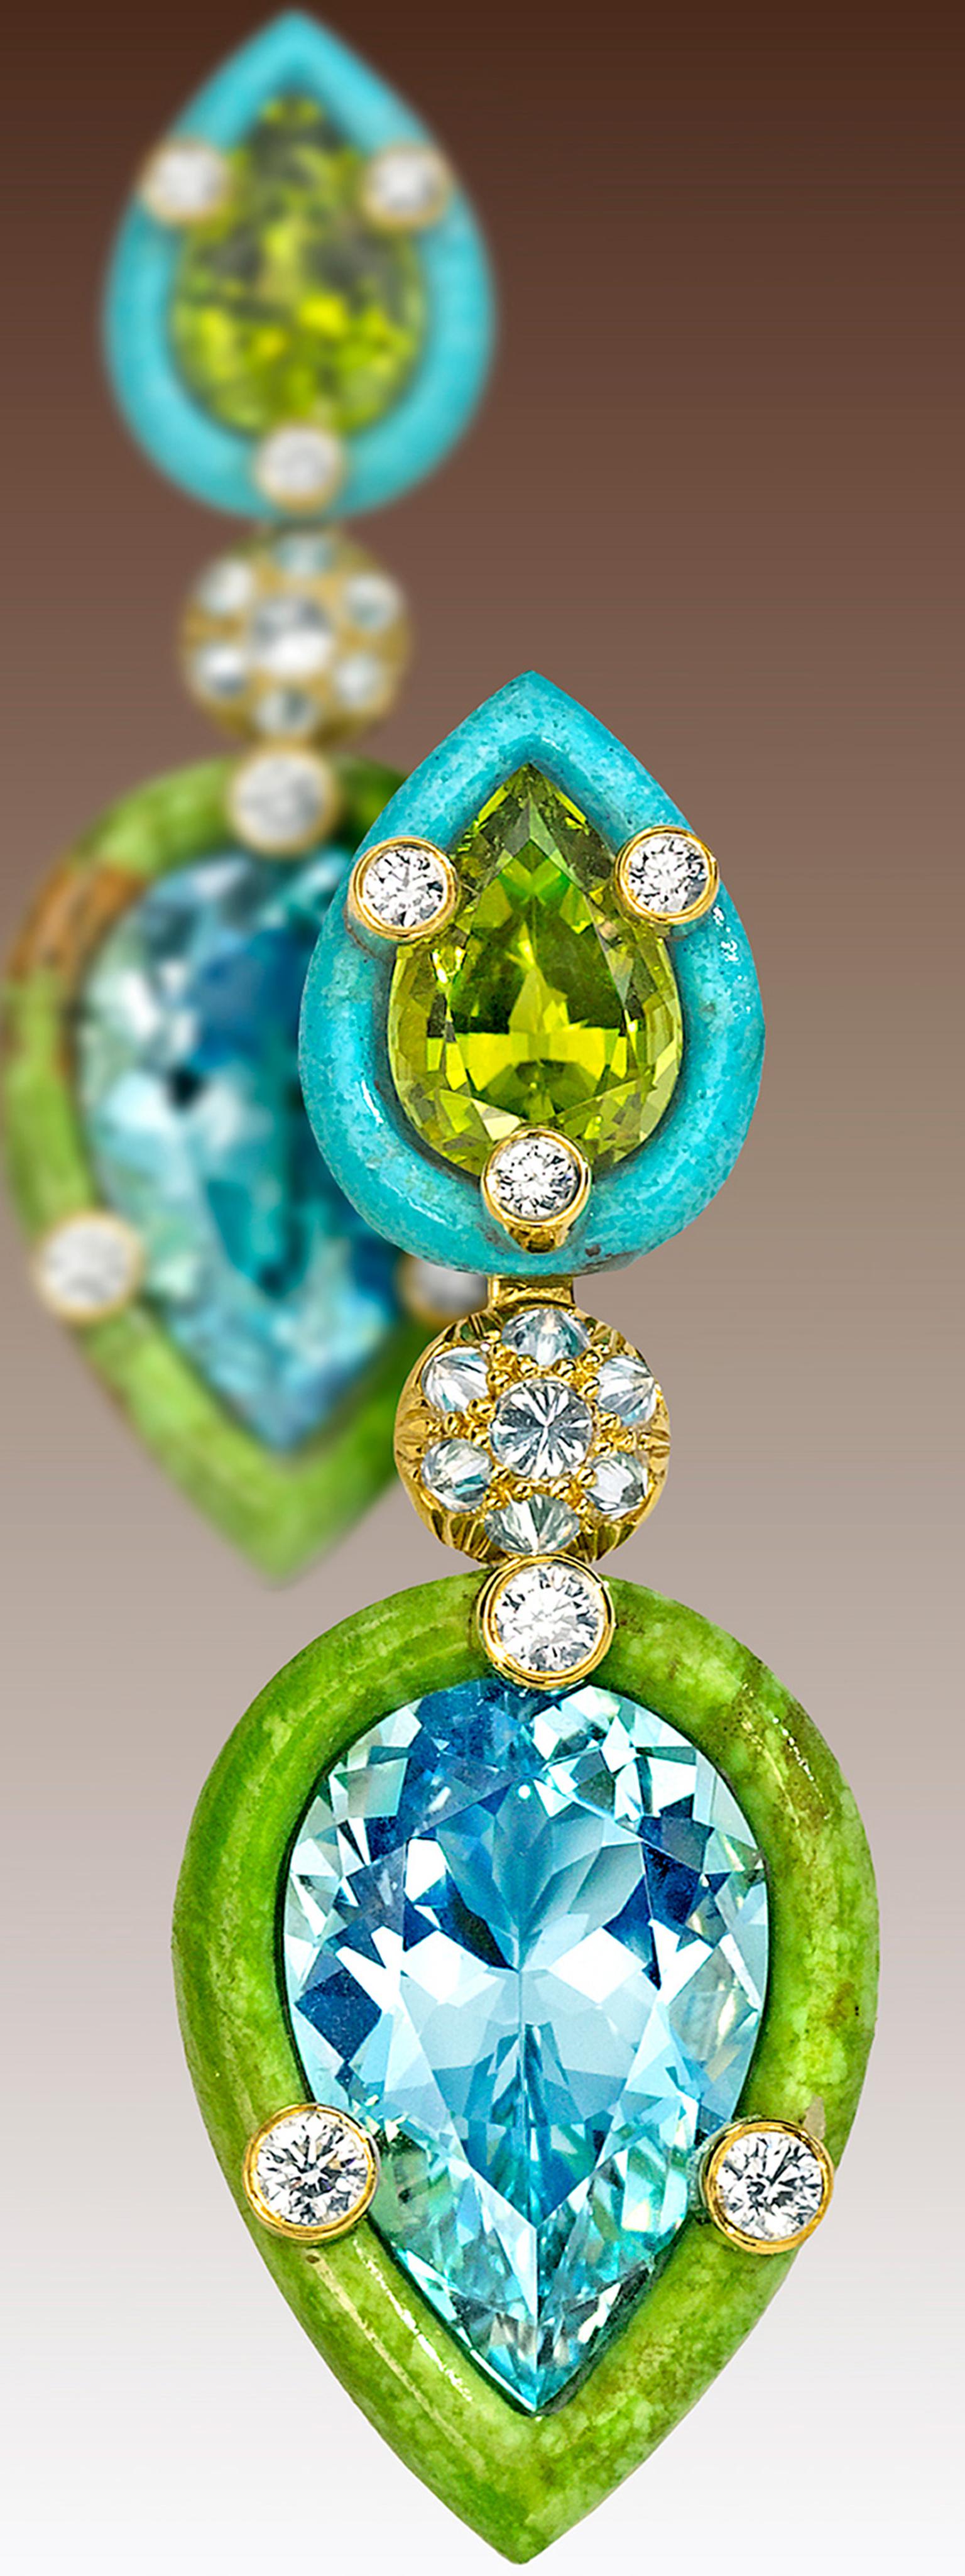 Nicholas Varney 2013 'Duo' Style earrings featuring two pear-shape aquamarines retained by hand-carved gaspeite and paired with two pear-shaped peridots retained by hand-carved turquoise and joined by yellow gold and diamonds.